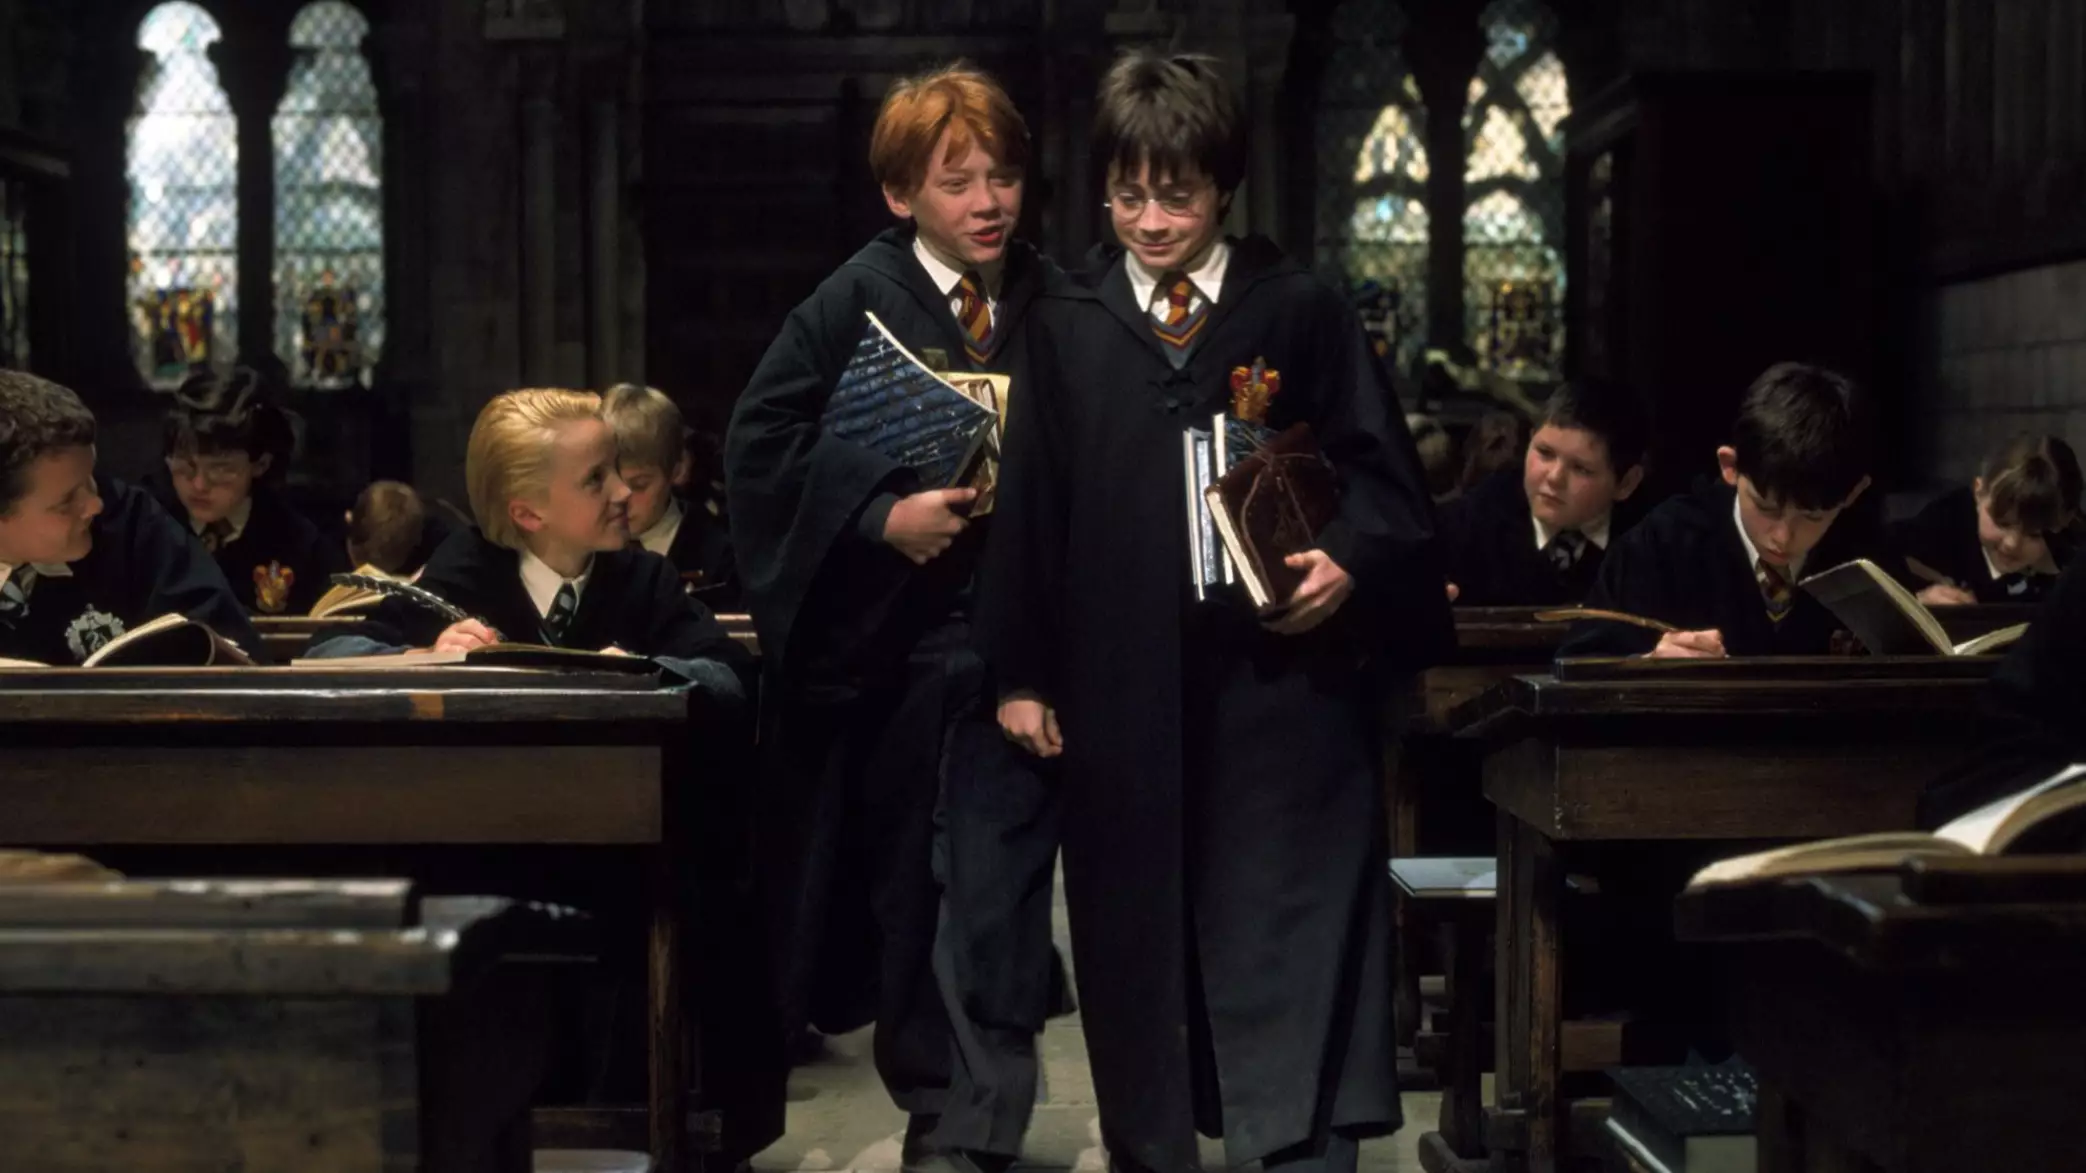 JK Rowling Has Launched 'Harry Potter' Classes